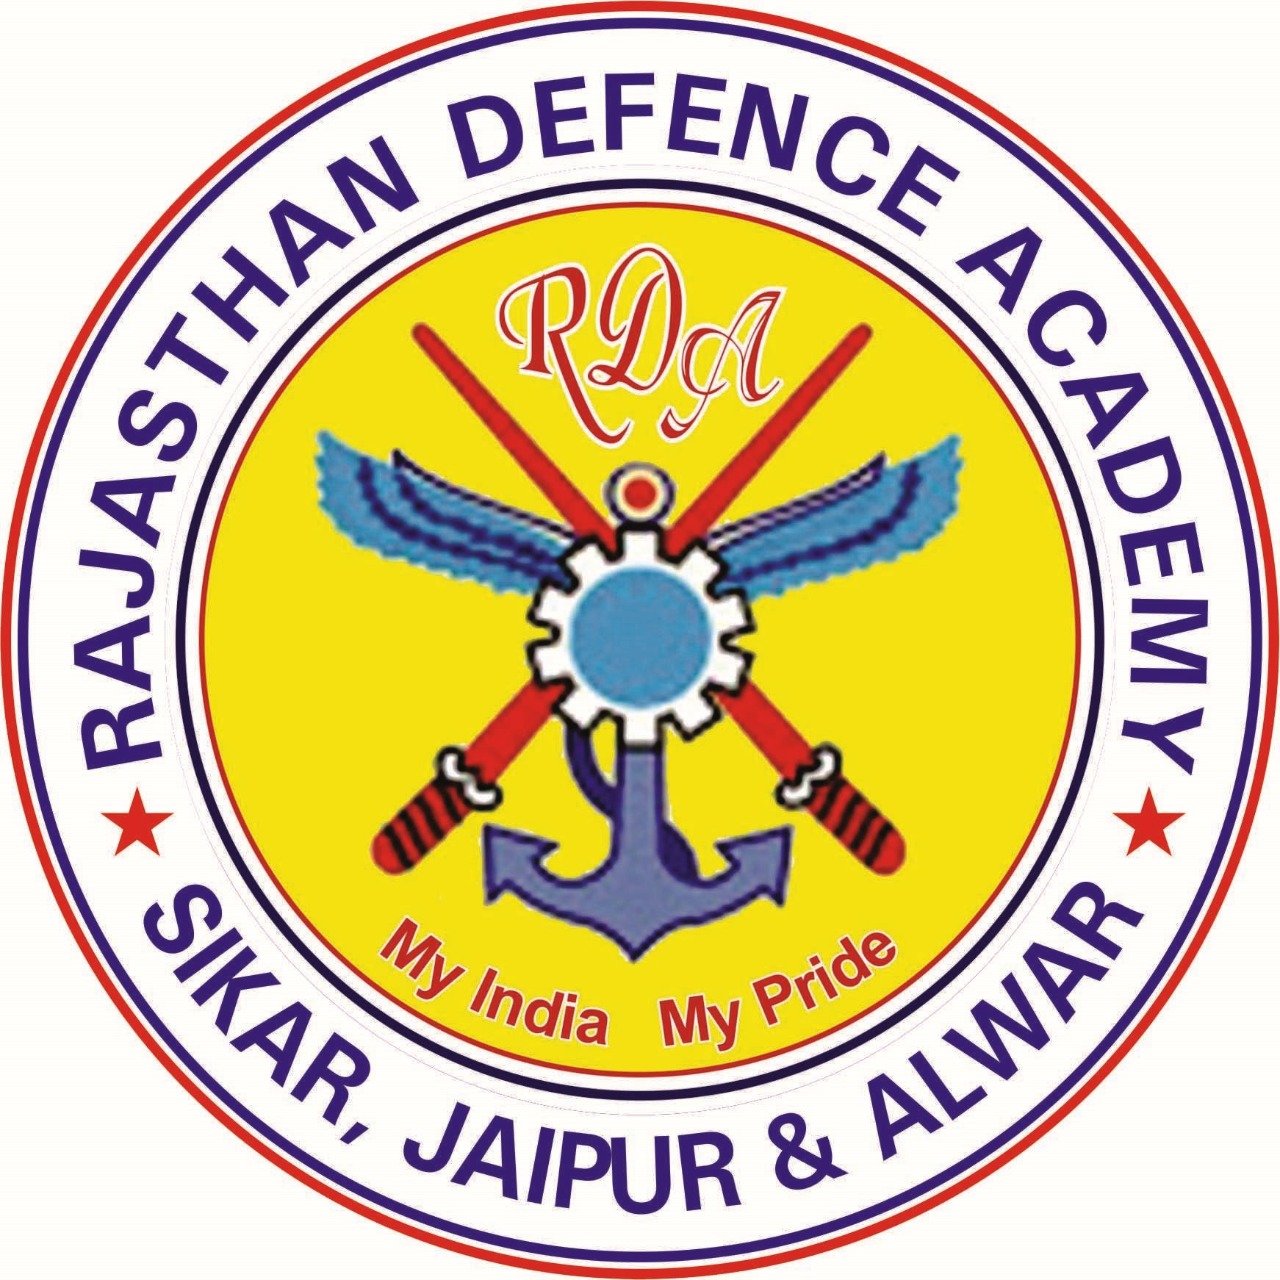 RAJASTHAN DEFENCE ACADEMY